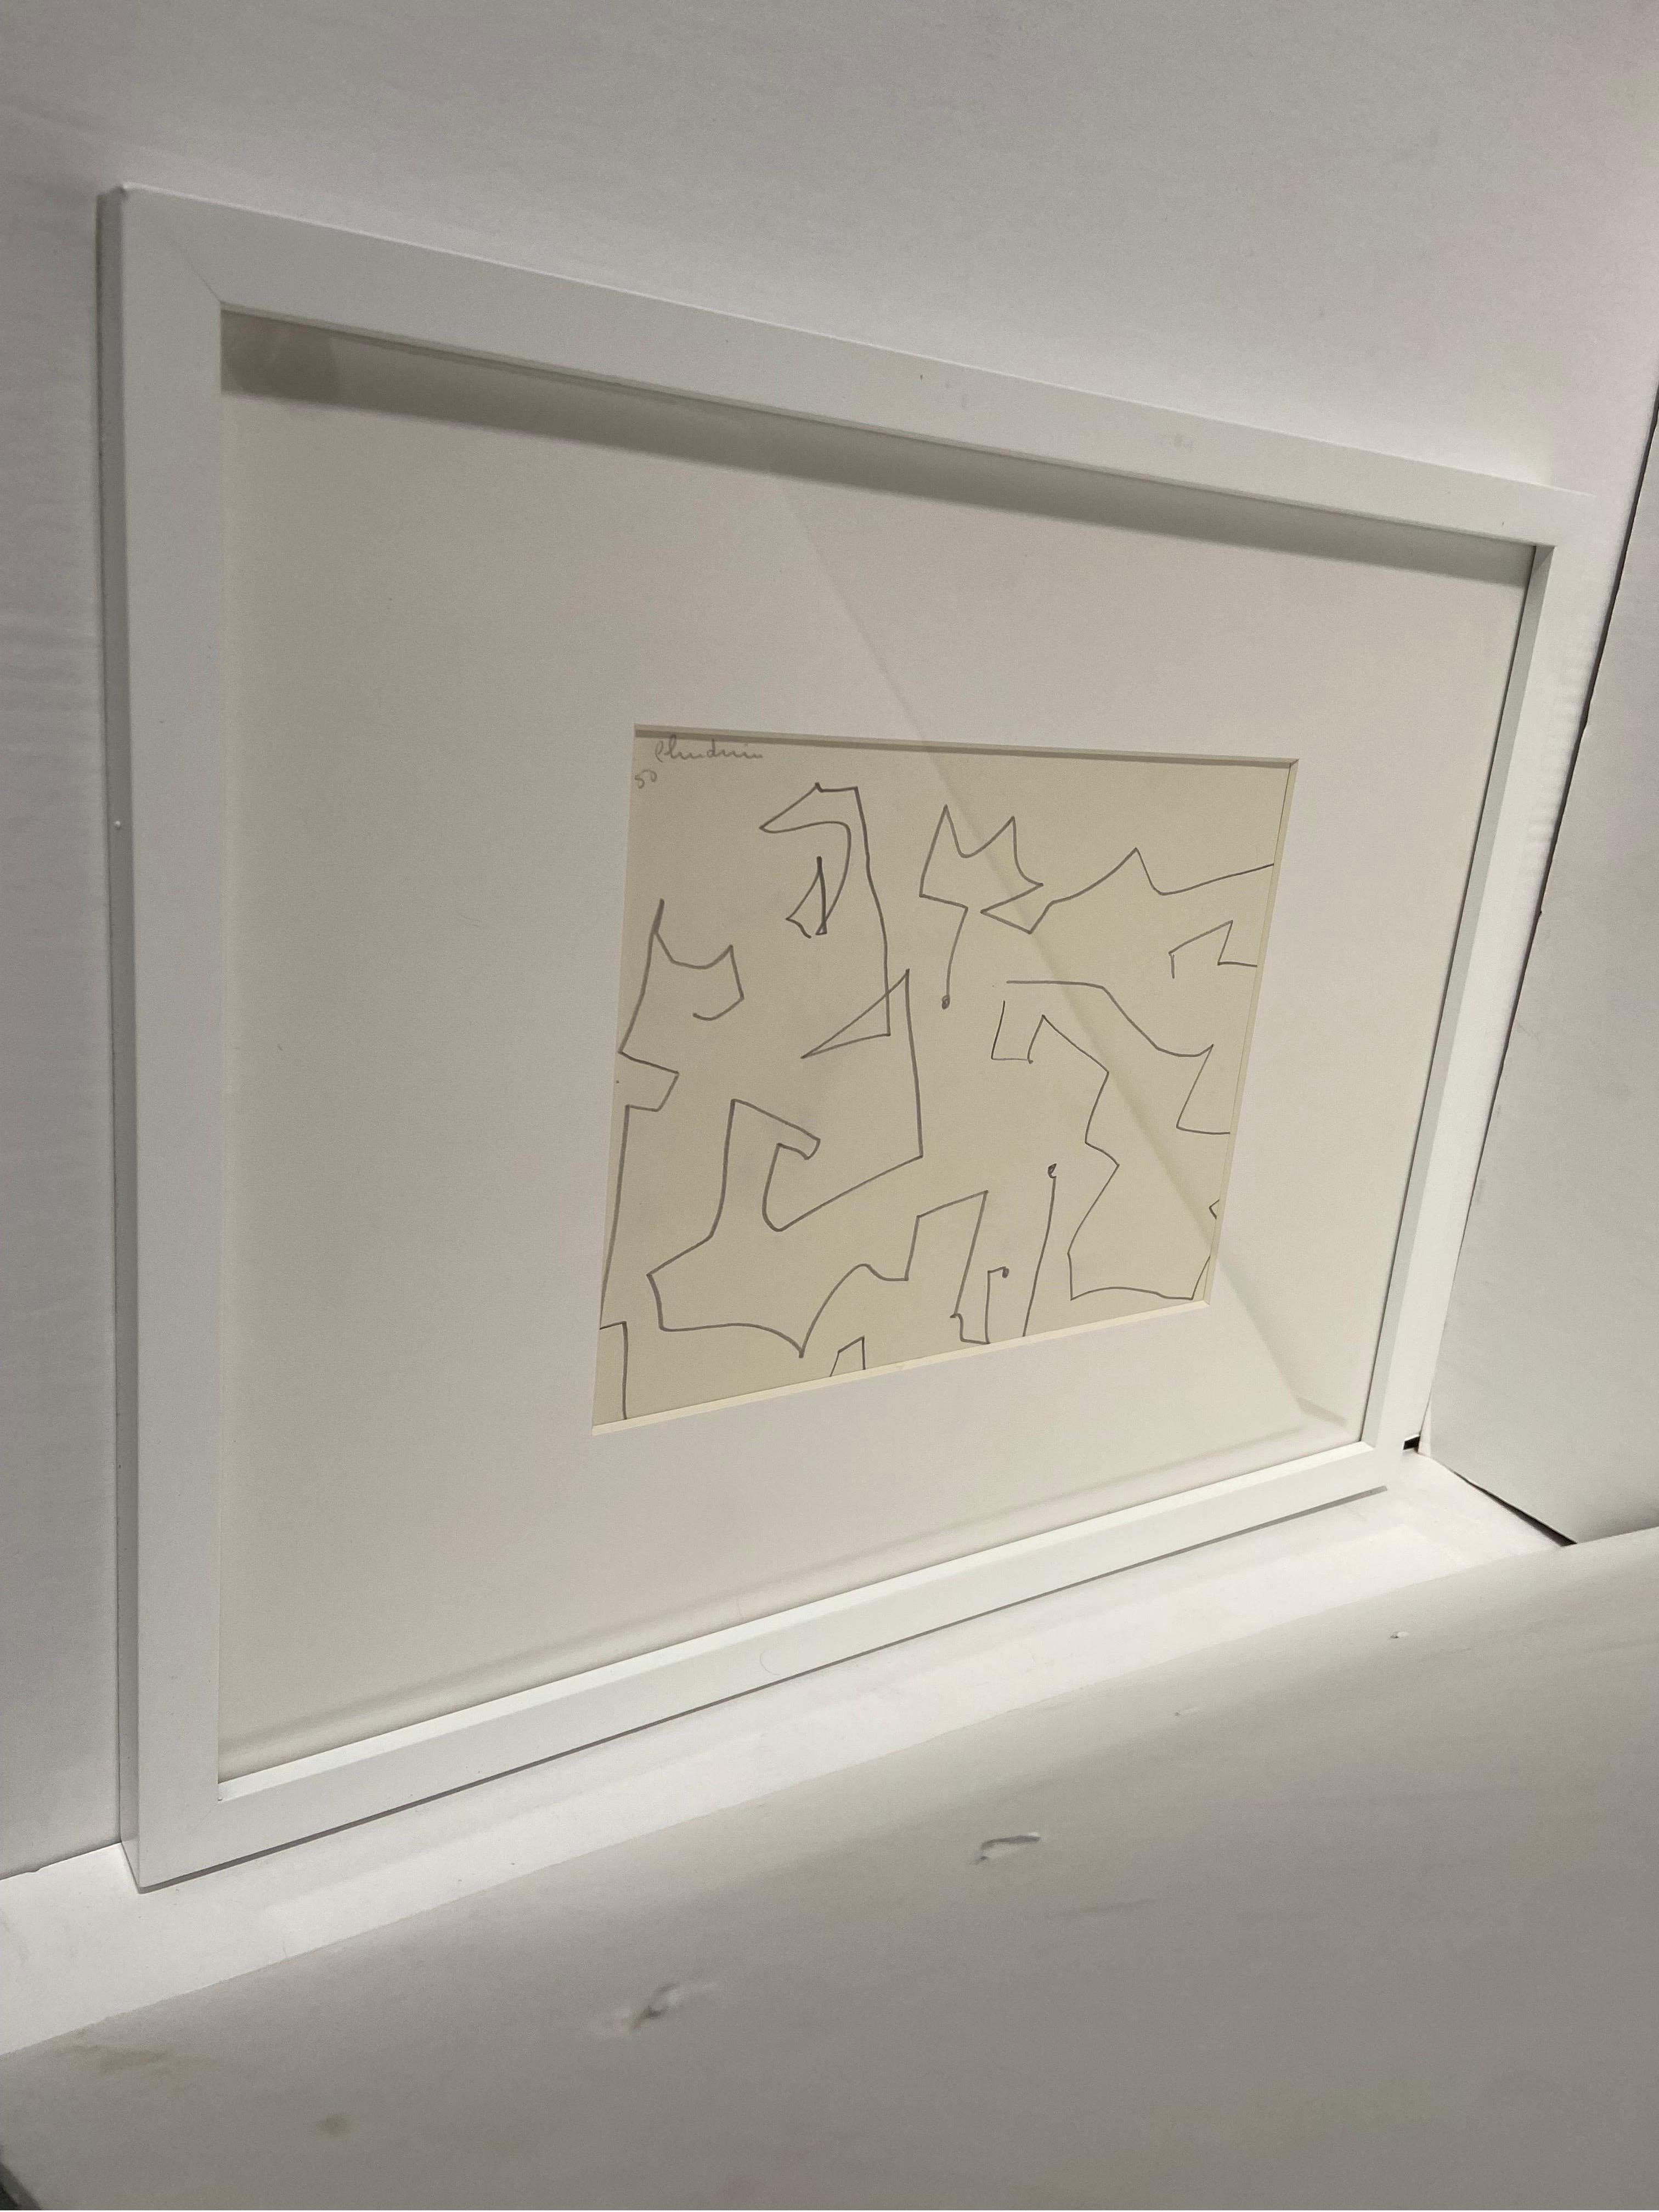 Mid-Century Modern 1950 Abstract Geometric Drawing in Pencil on Paper by Eve Clendenin NYC, Framed